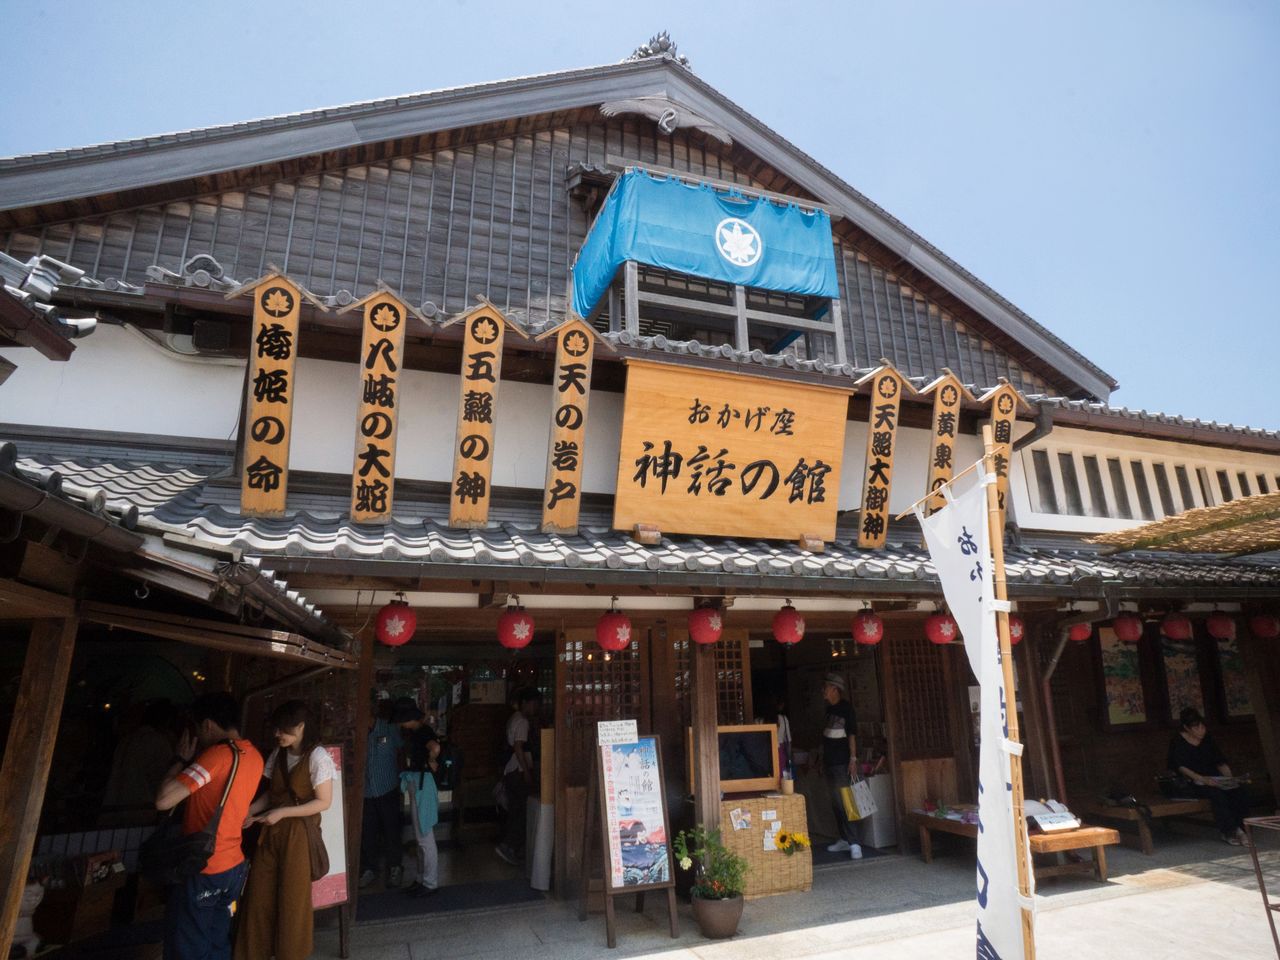 Okage-za’s Shinwa no Yakata is open year-round. Admission is ¥300 for adults, ¥100 for children aged 11 and under.